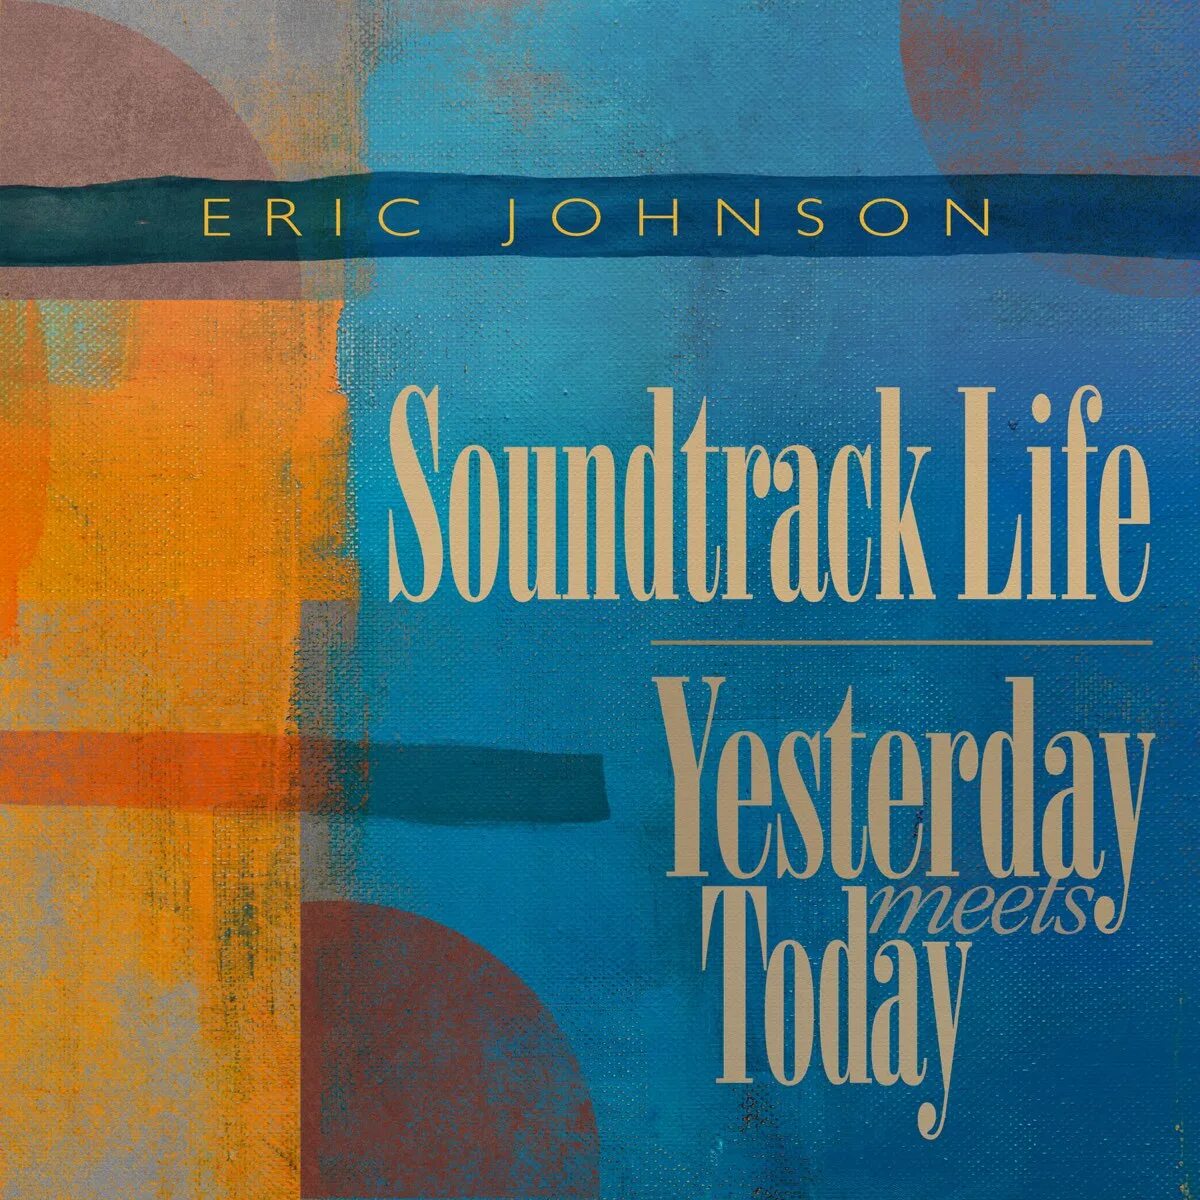 Yesterday my life was. Eric Johnson (2) – yesterday meets today.